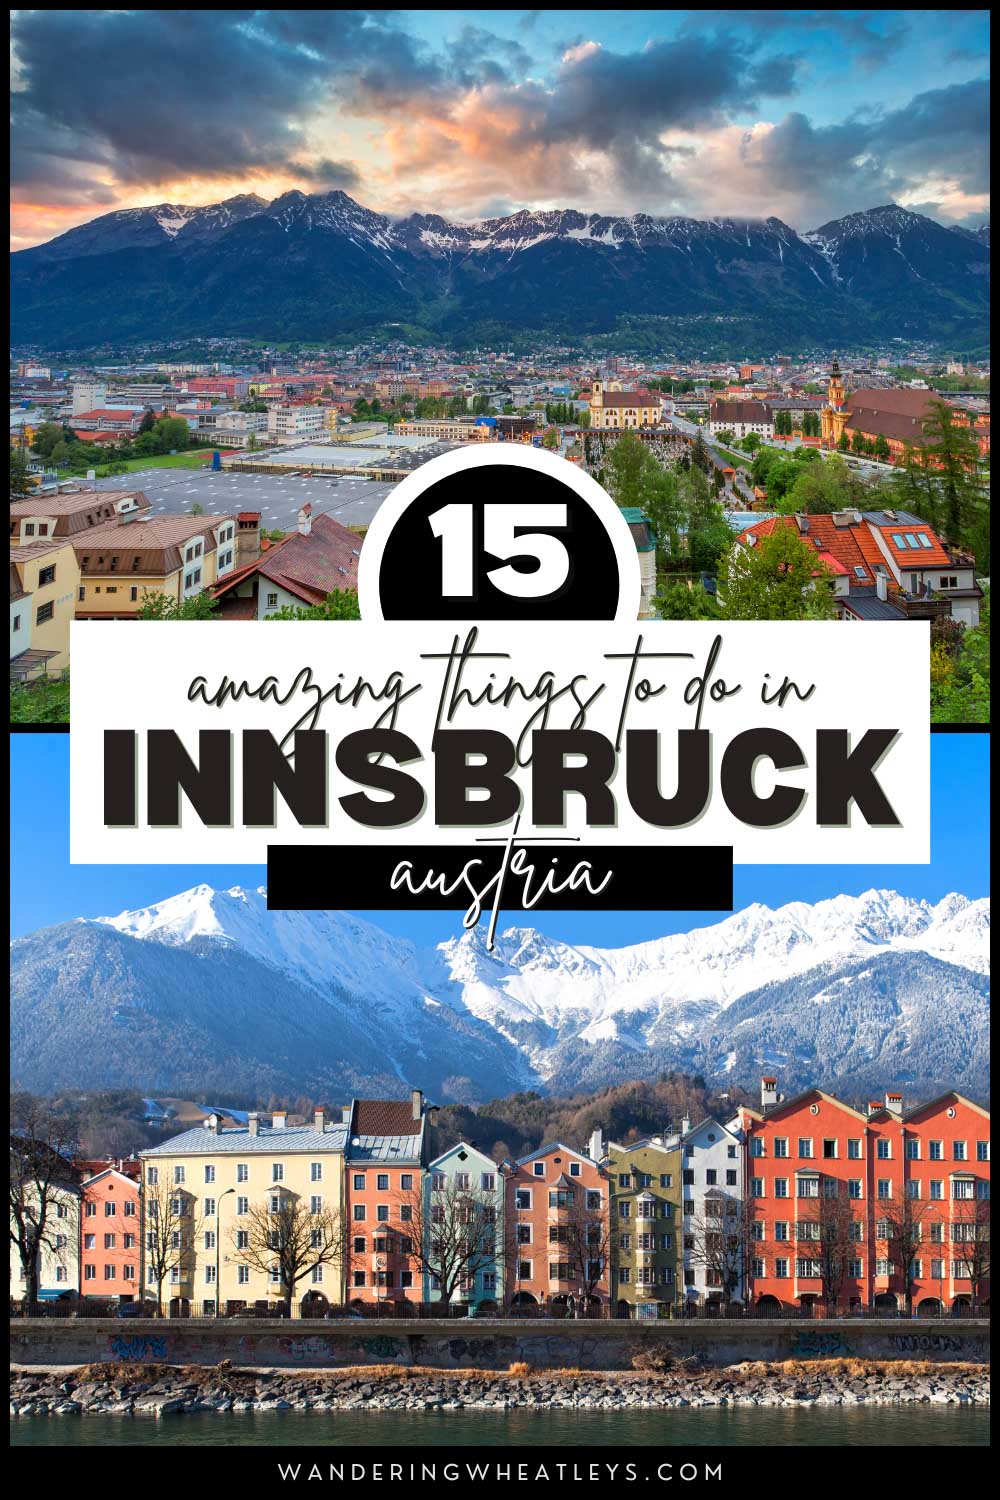 The Best Things to do in Innsbruck